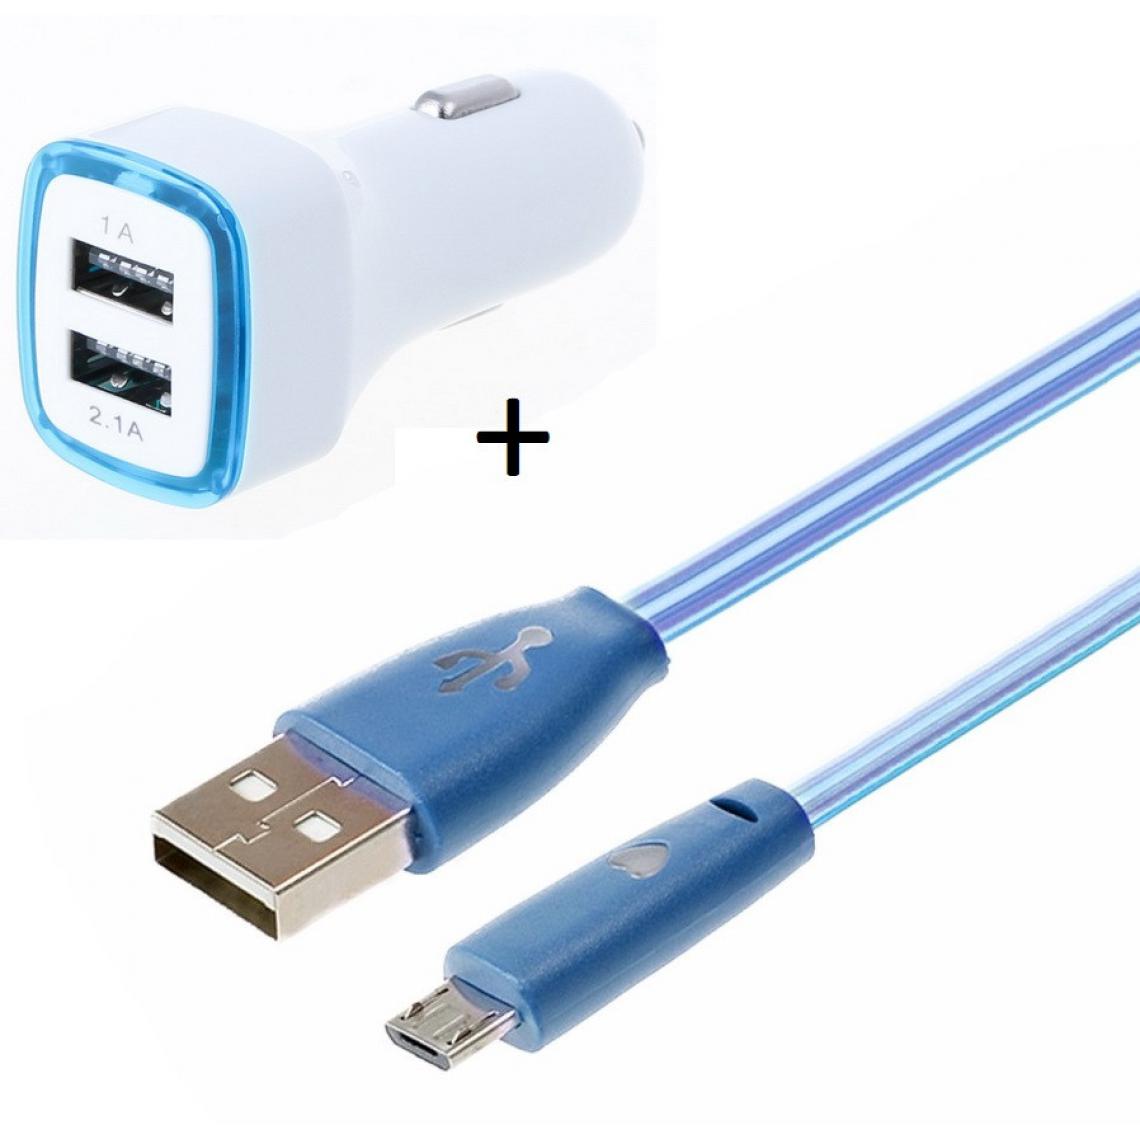 Shot - Pack Chargeur Voiture pour SAMSUNG Galaxy J4+ Smartphone Micro USB (Cable Smiley + Double Adaptateur LED Allume Cigare) (BLEU) - Chargeur Voiture 12V